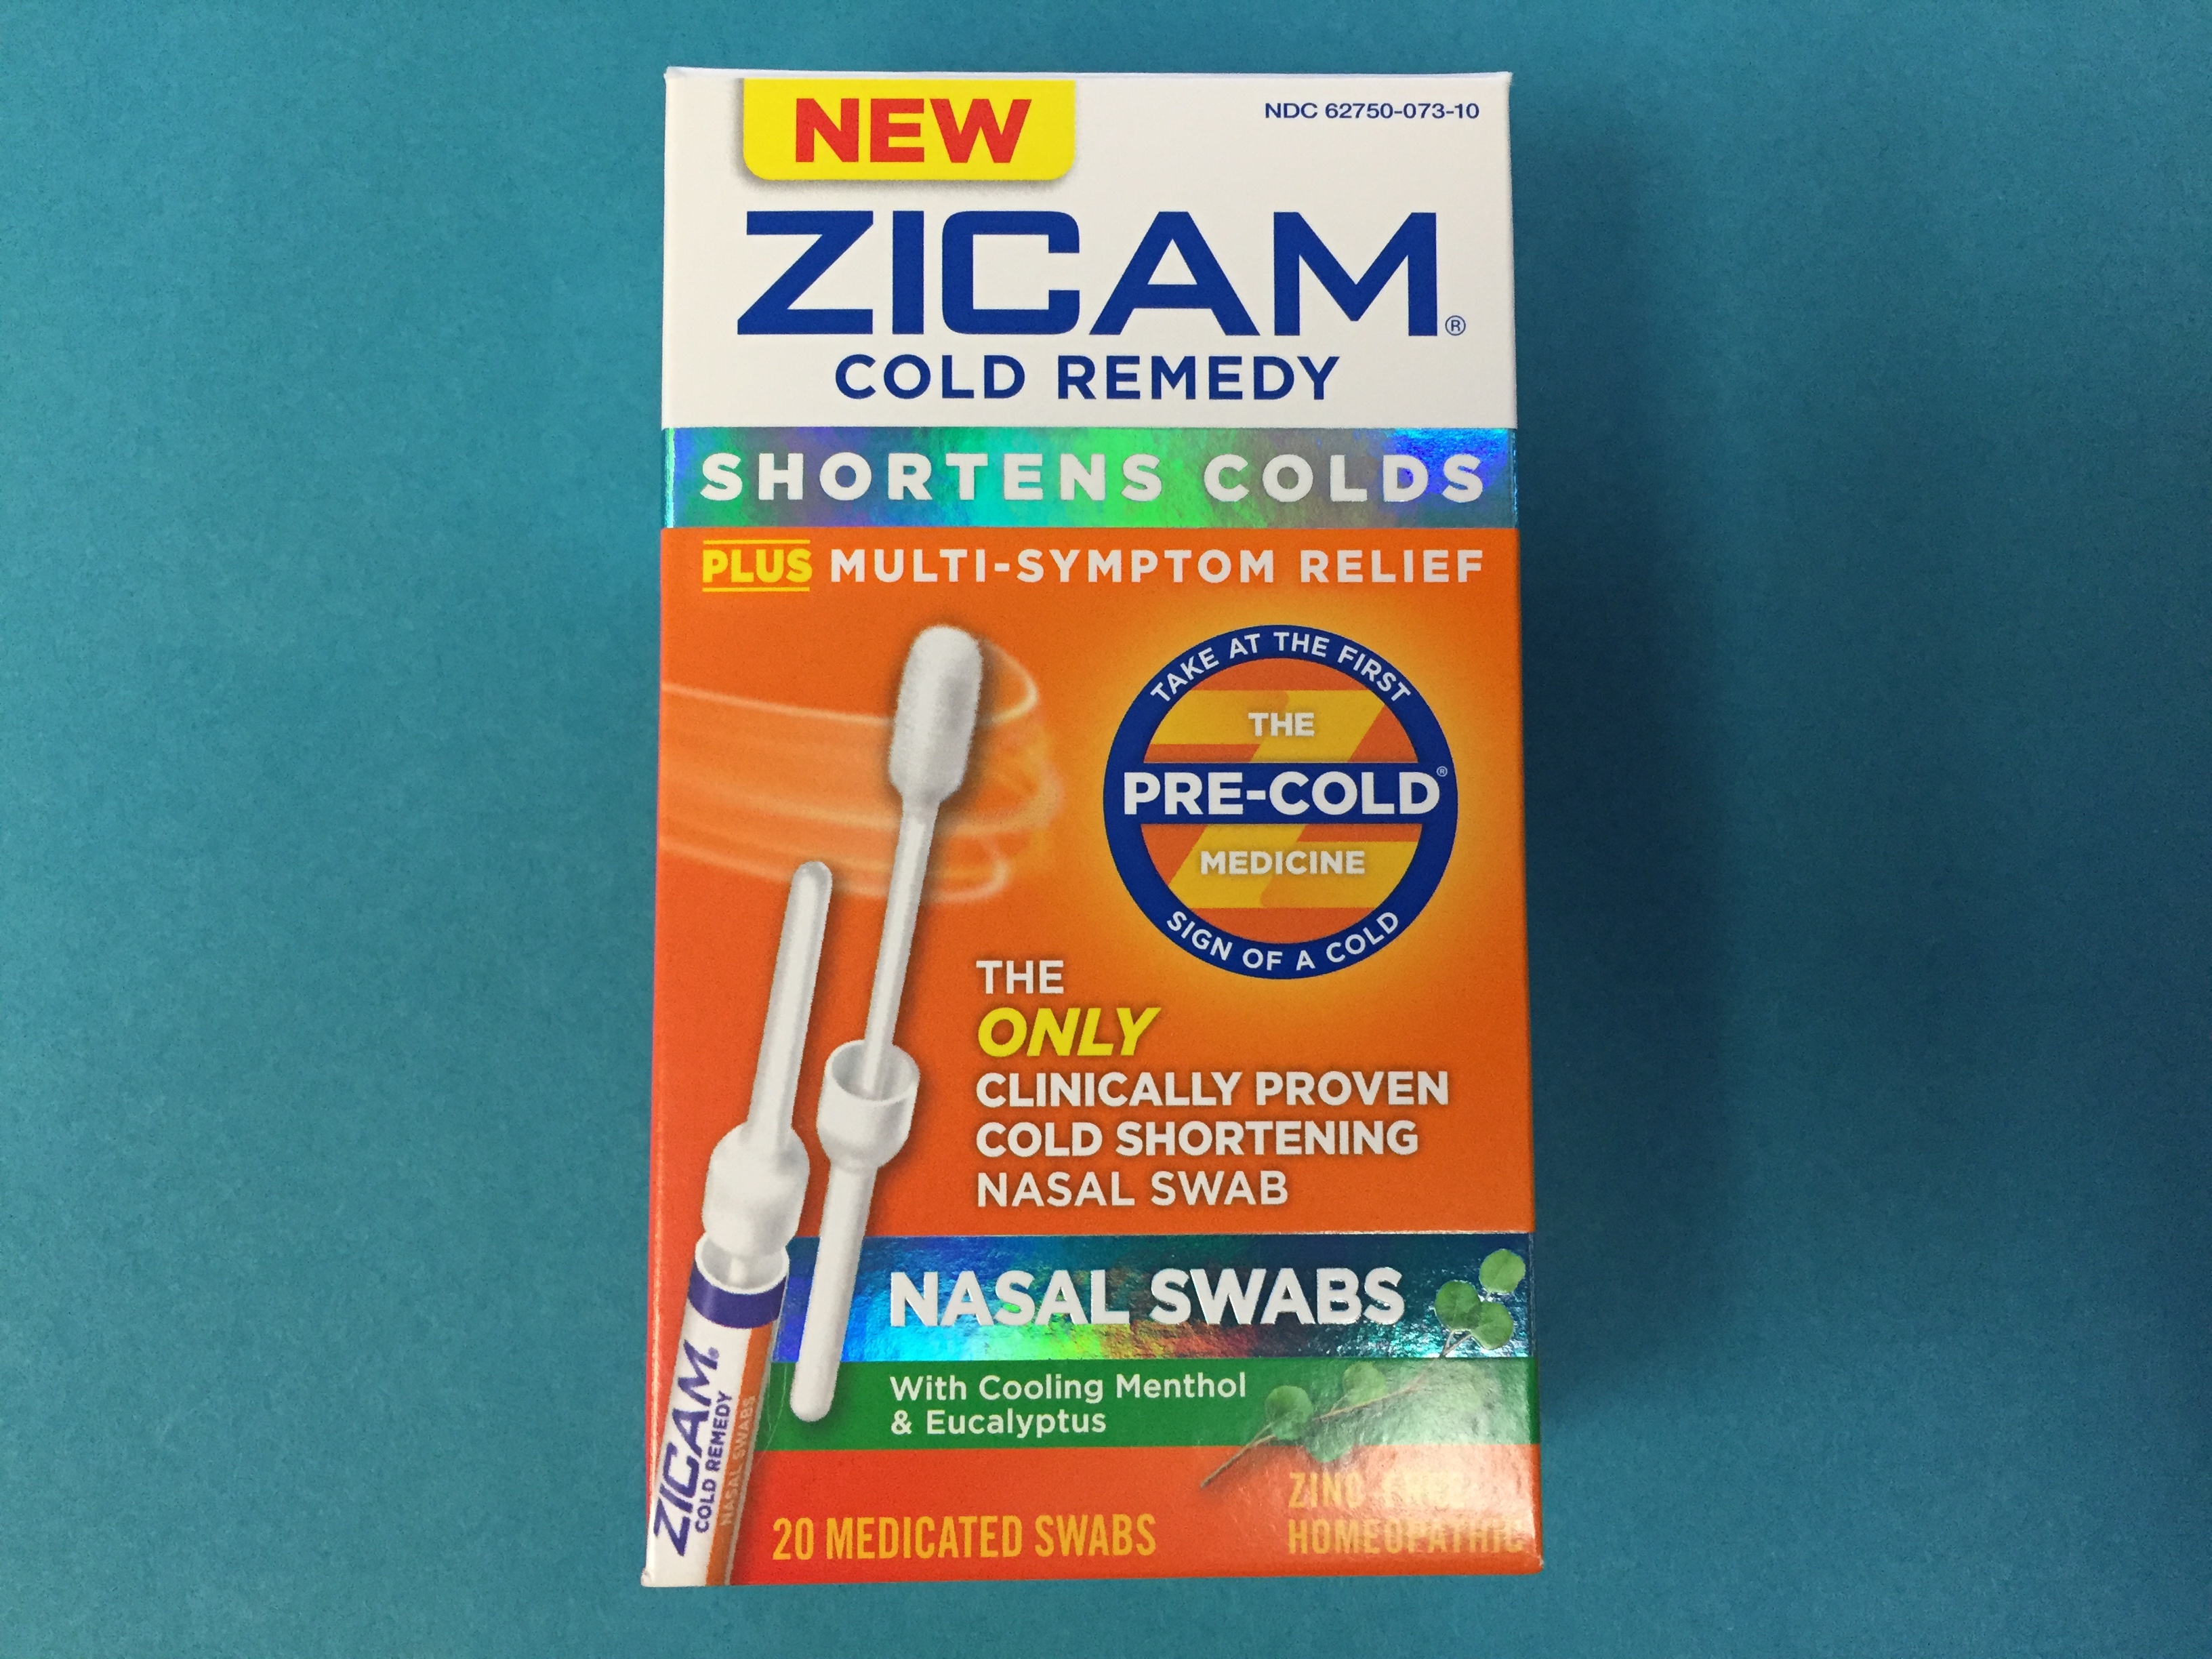 Zicam Cold Remedy Nasal Swabs The Midnite Review 